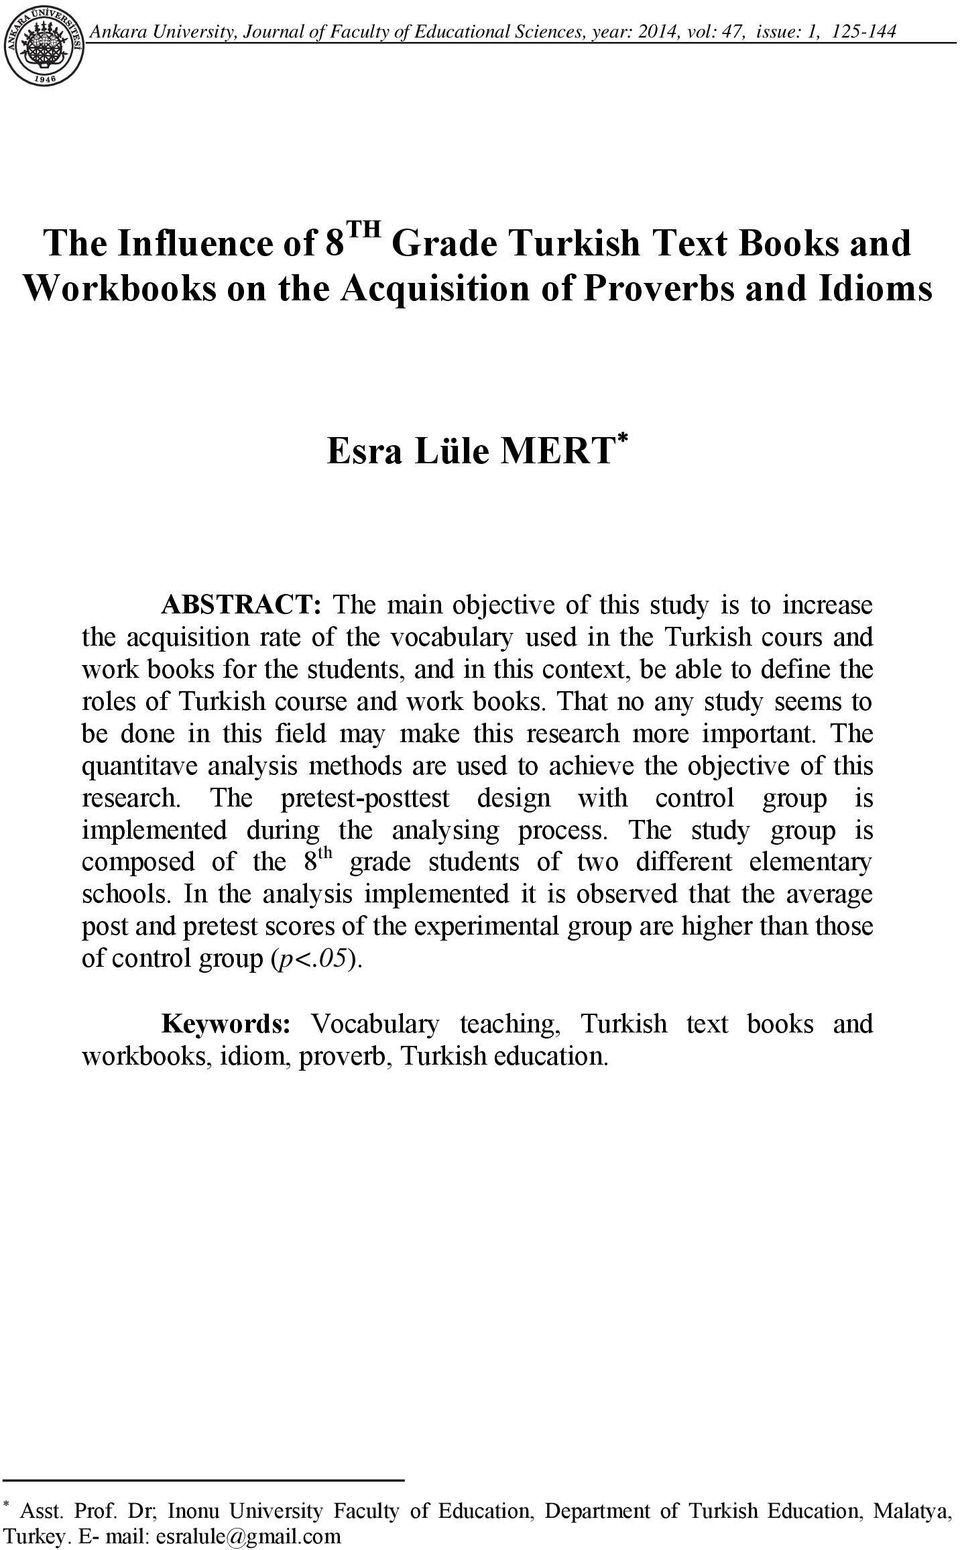 be able to define the roles of Turkish course and work books. That no any study seems to be done in this field may make this research more important.